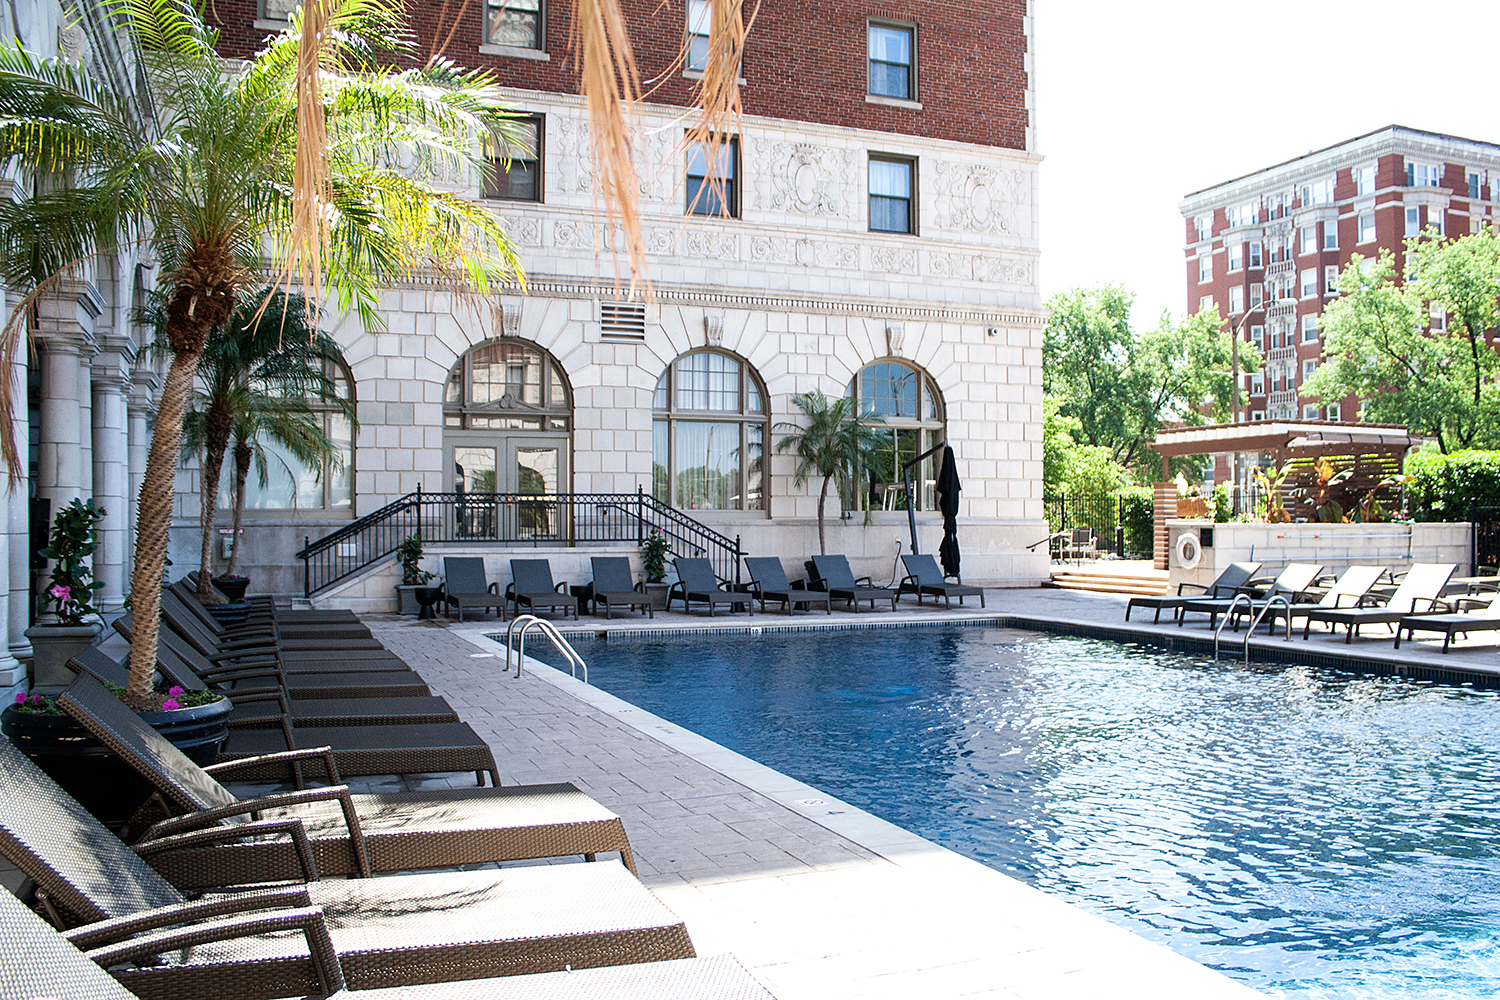 06stlouis-chaseparkplaza-hotel-pool-travel-style